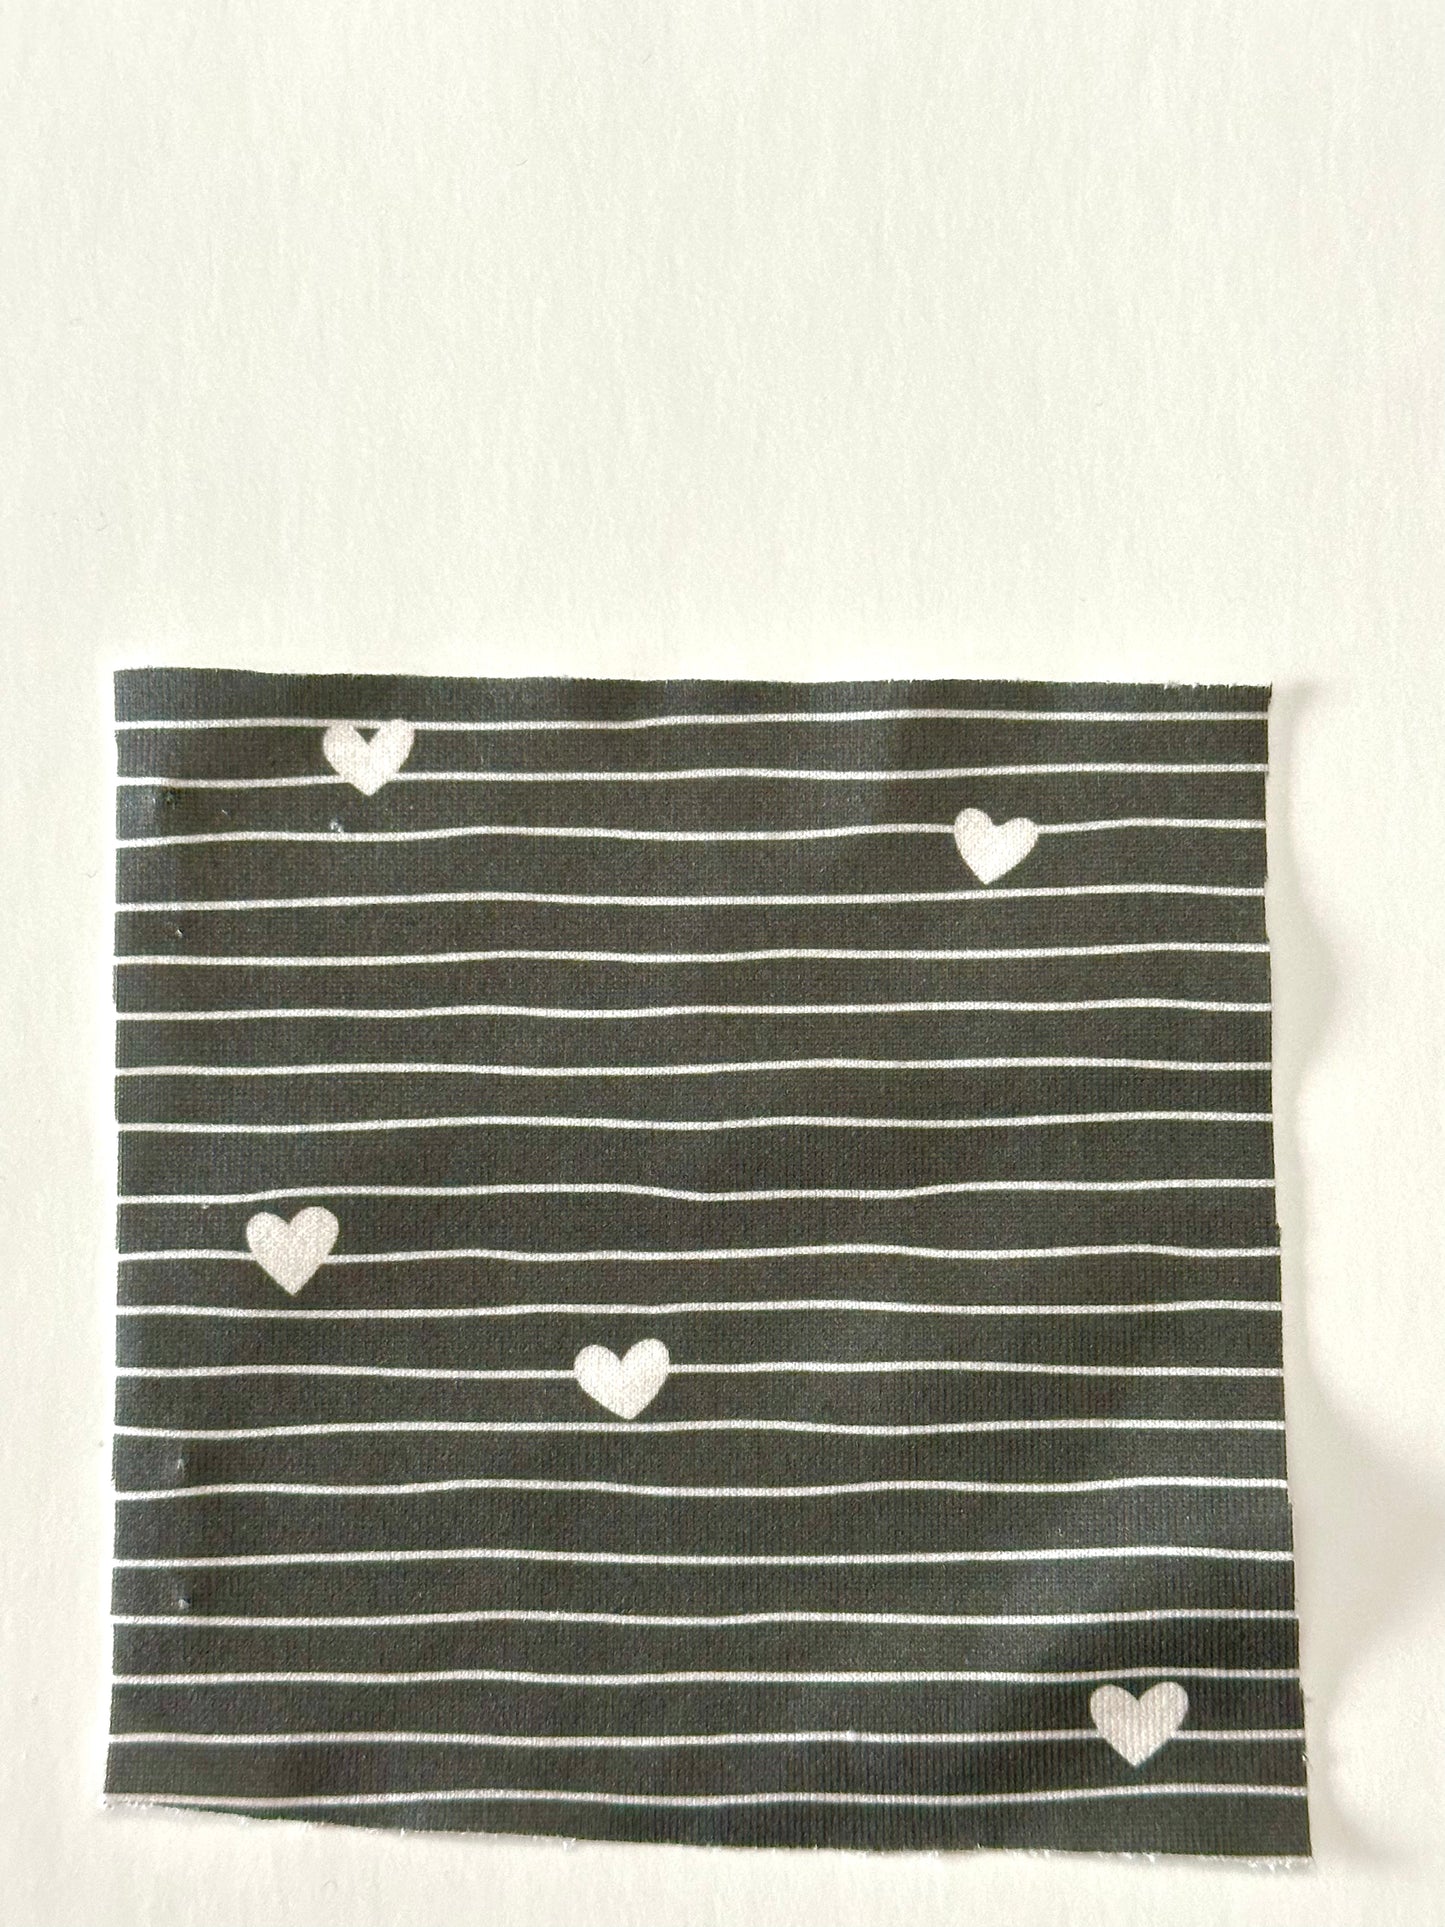 Pre-Order Line Hearts in Olive on Imitation Cotton Jersey Knit Fabric Sold by the 1/4 yard